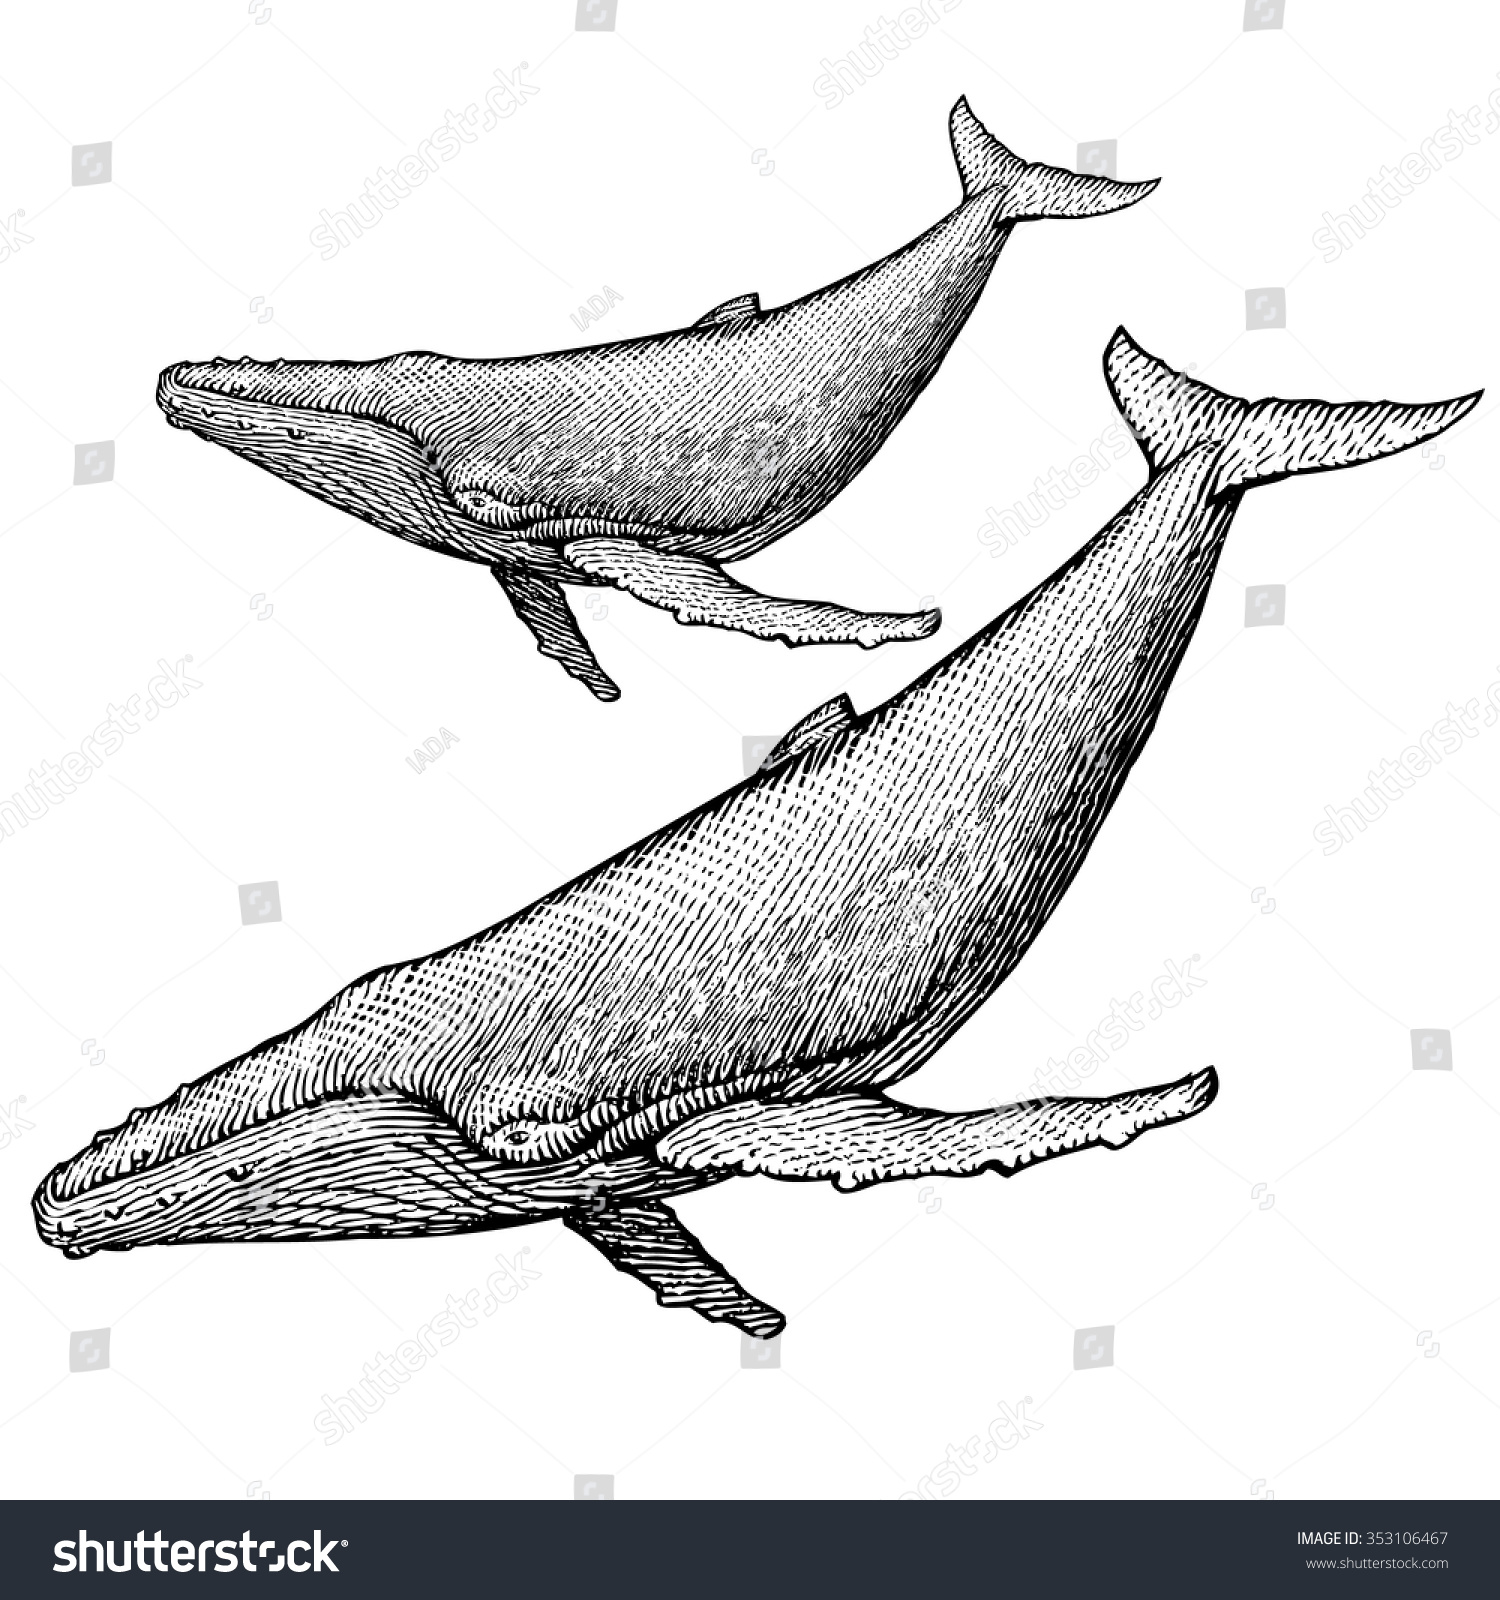 Humpback Whale Illustration Stock Vector Royalty Free